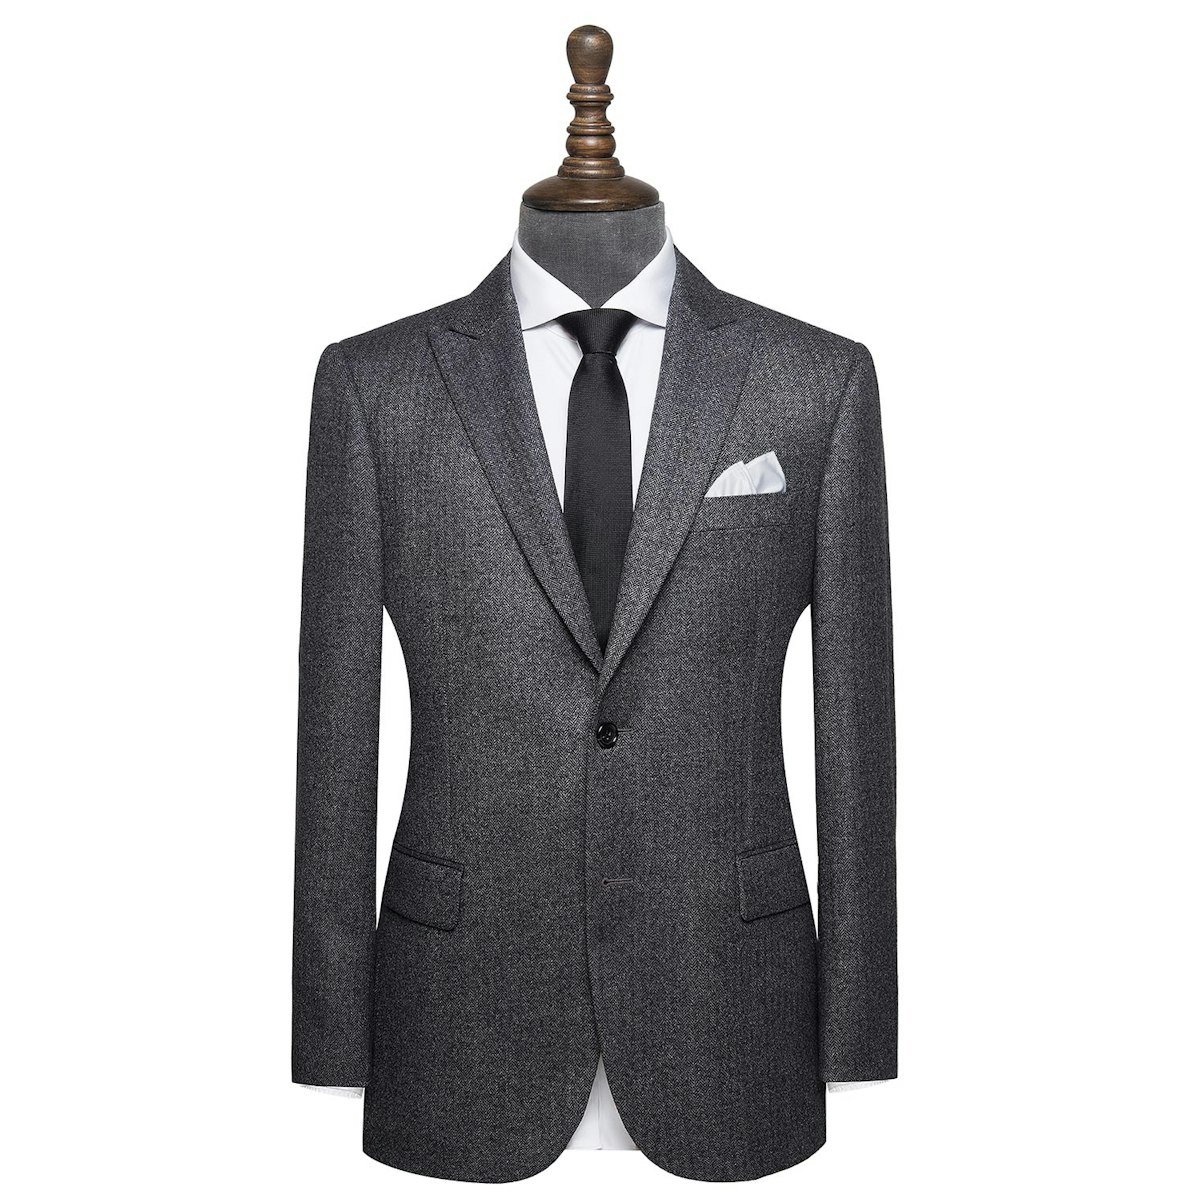 InStitchu Collection The York mens suit